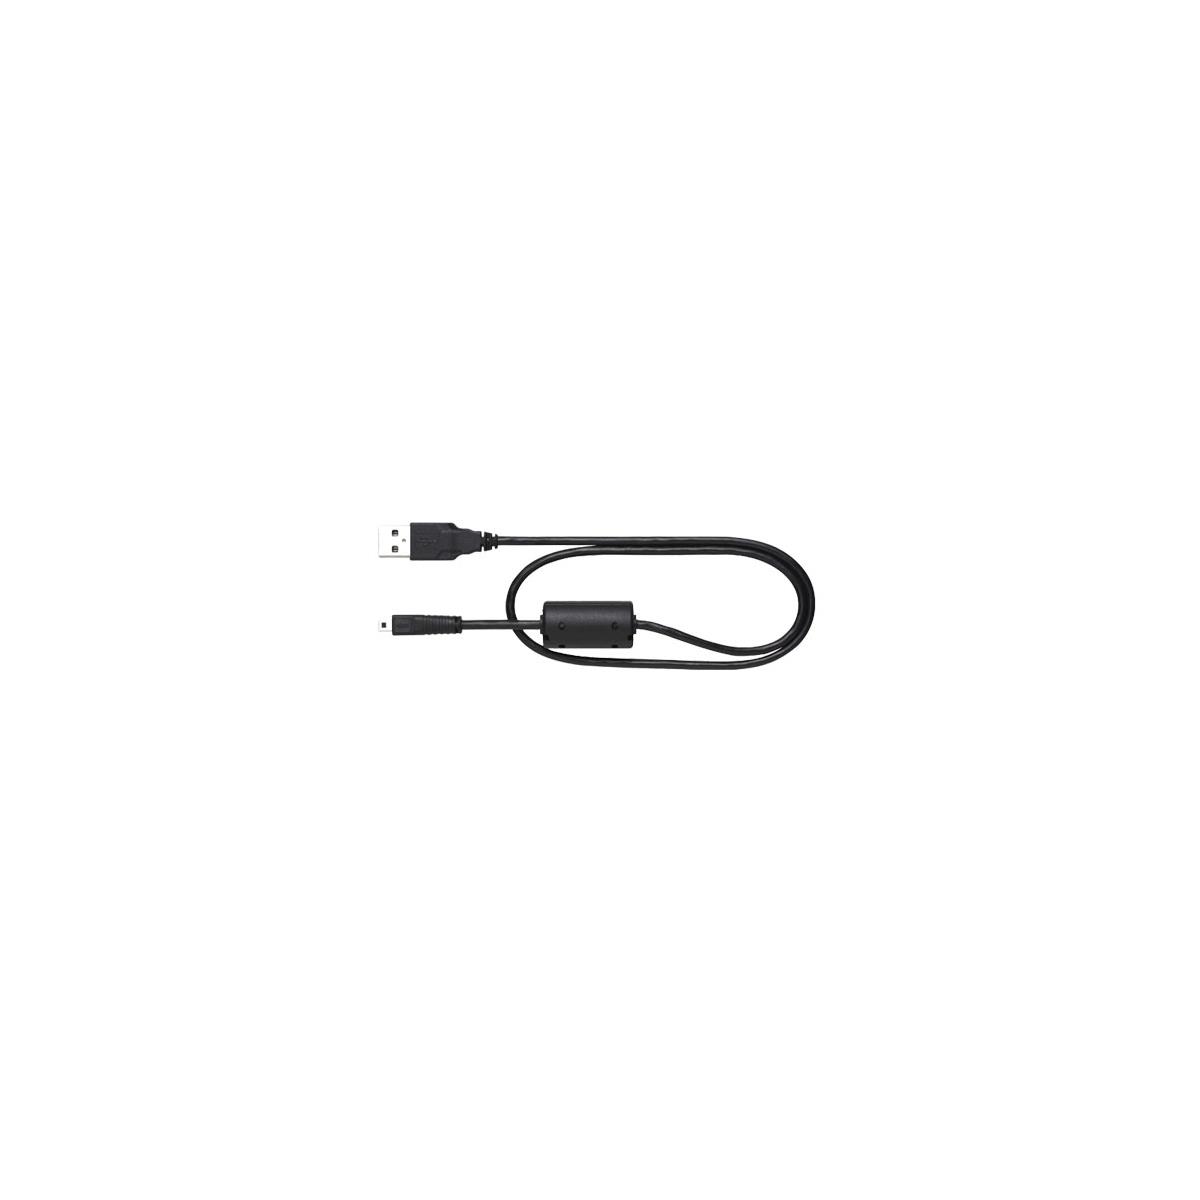 Image of Nikon UC-E16 USB Cable for COOLPIX Digital Cameras